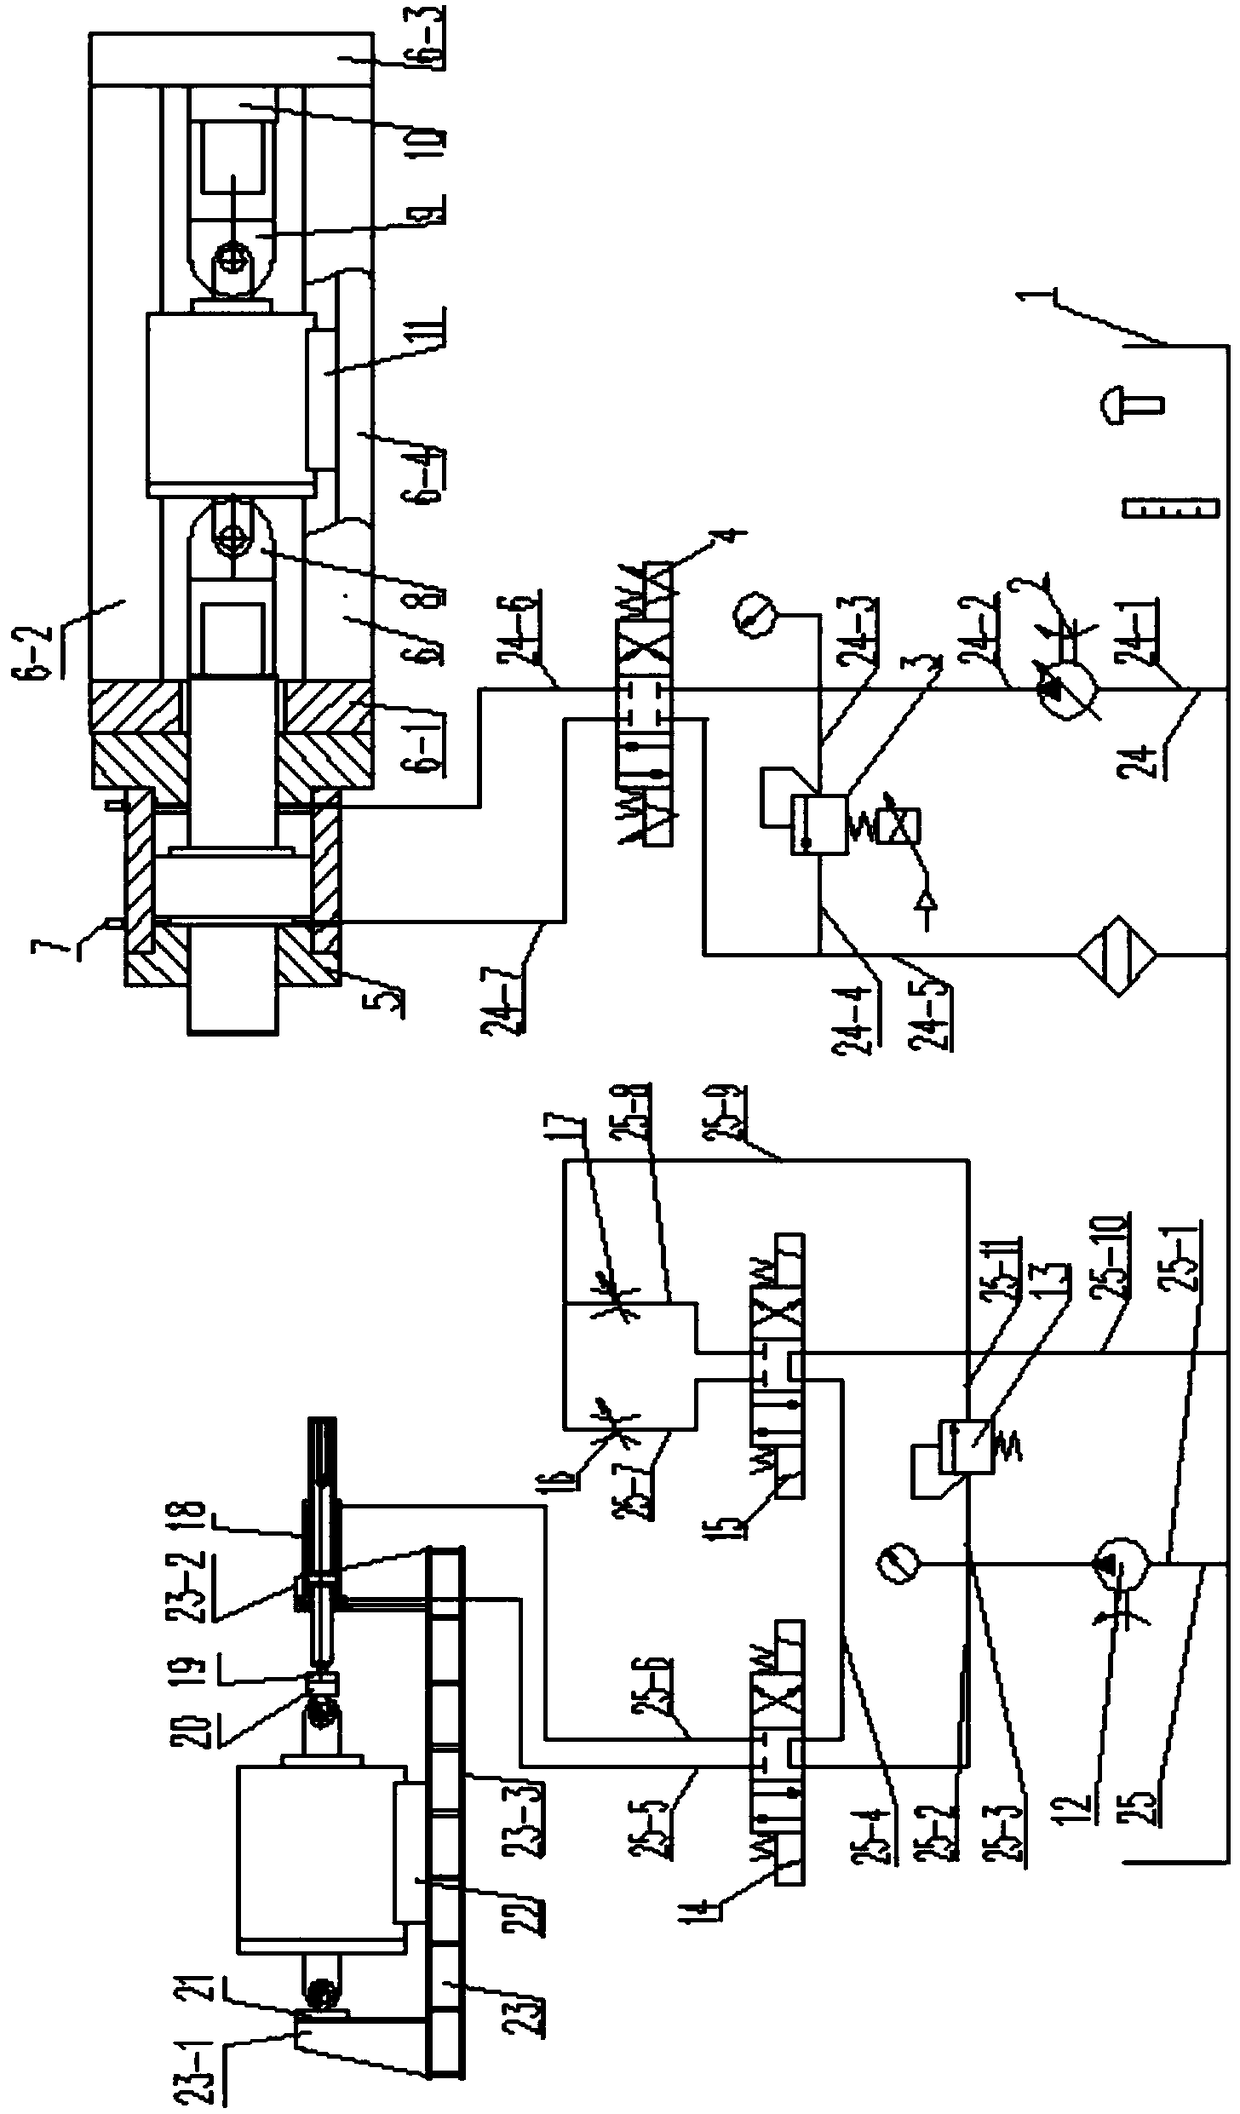 Method and device for test of large hydraulic damper